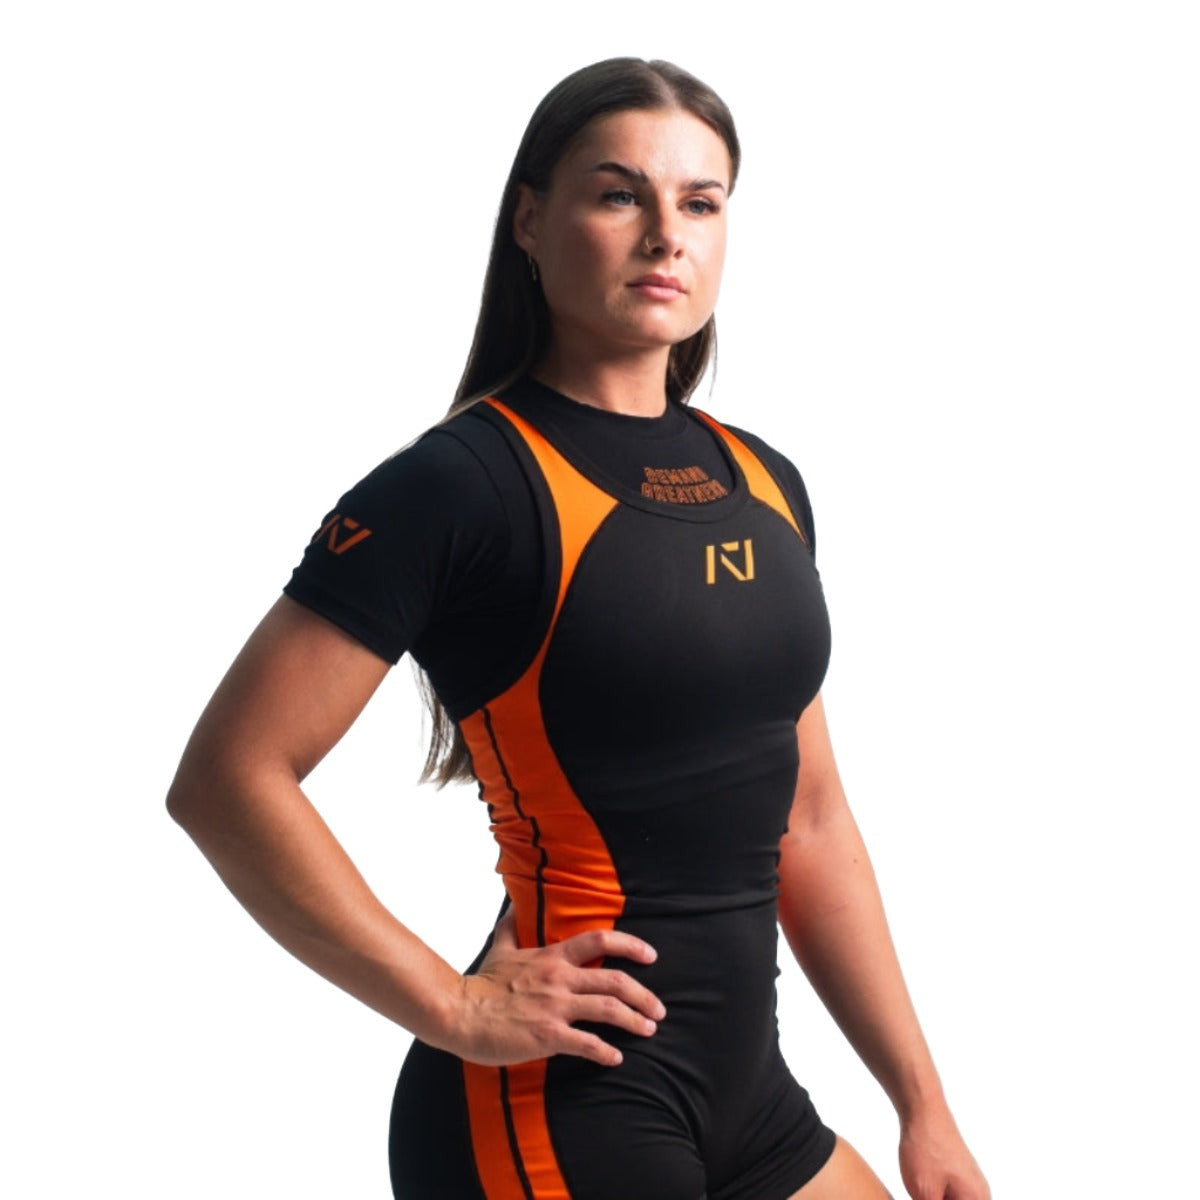 A7 Luno Women's Soft Suit - IPF Approved (Blaze)